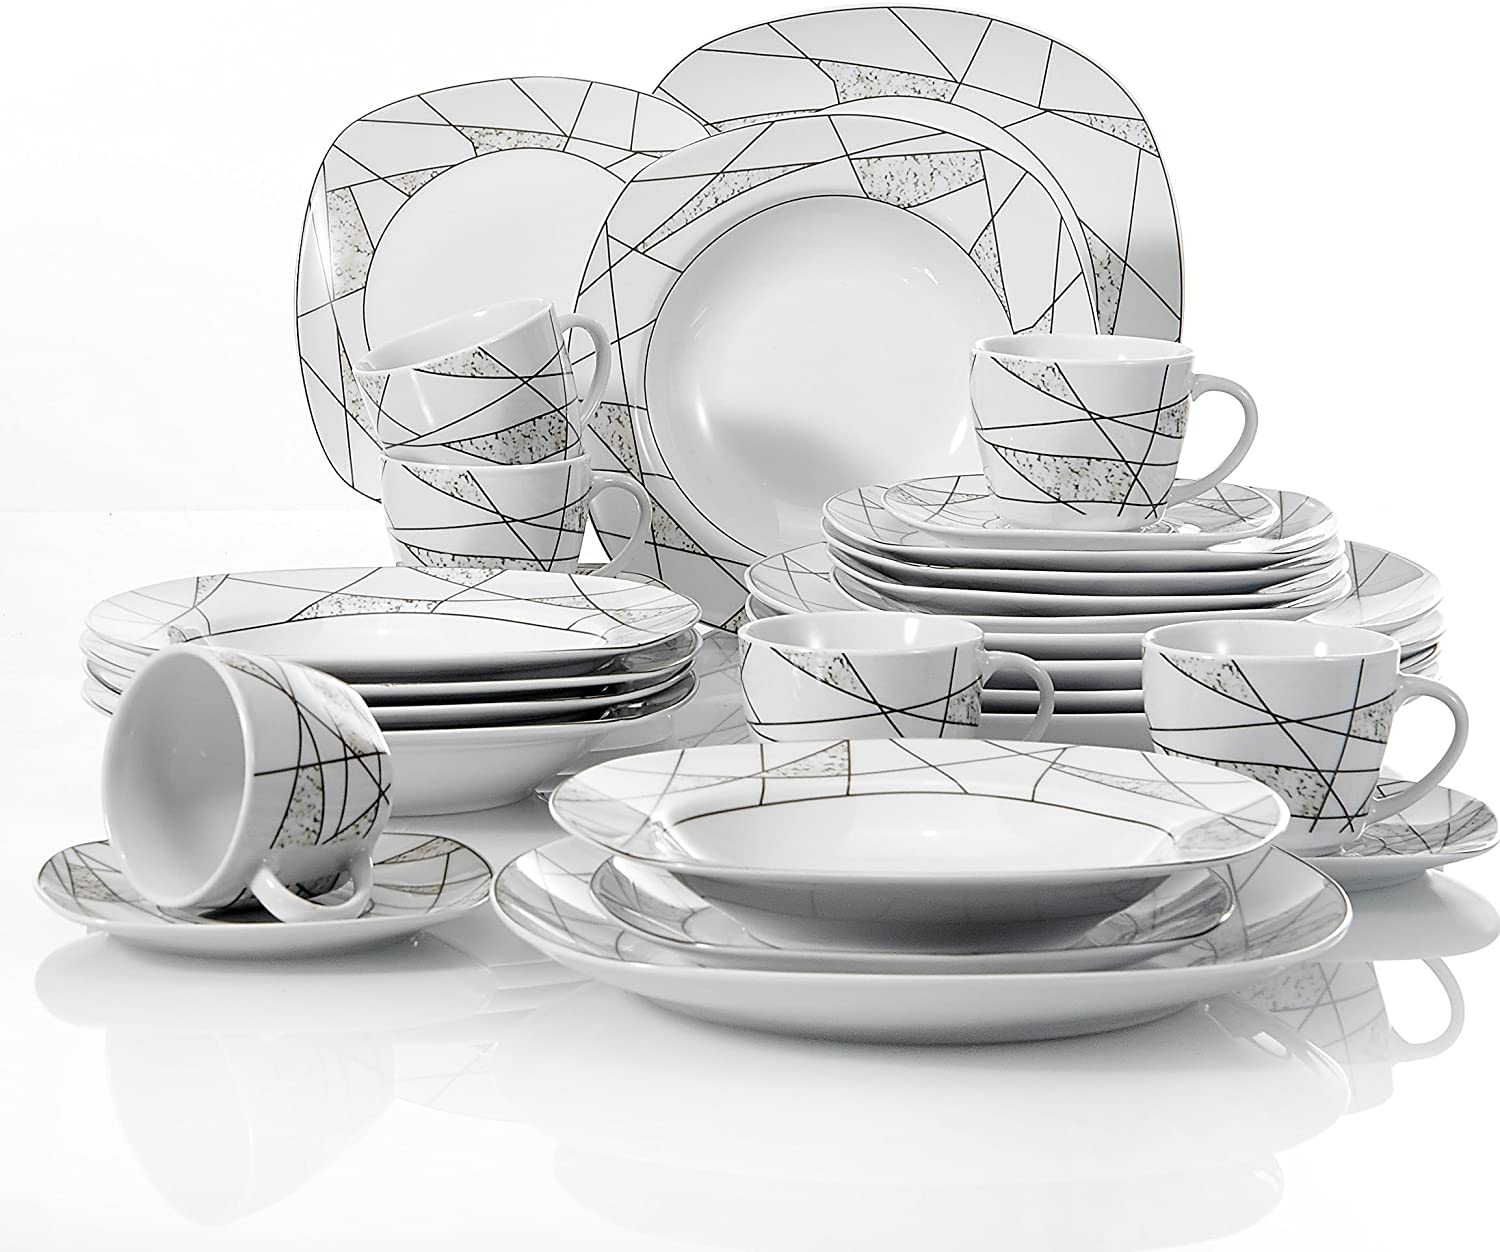 Veweet Serena Series Porcelain Dinner Service 60 Pieces Crockery Set for Restaurant and Family Tableware for 12 People